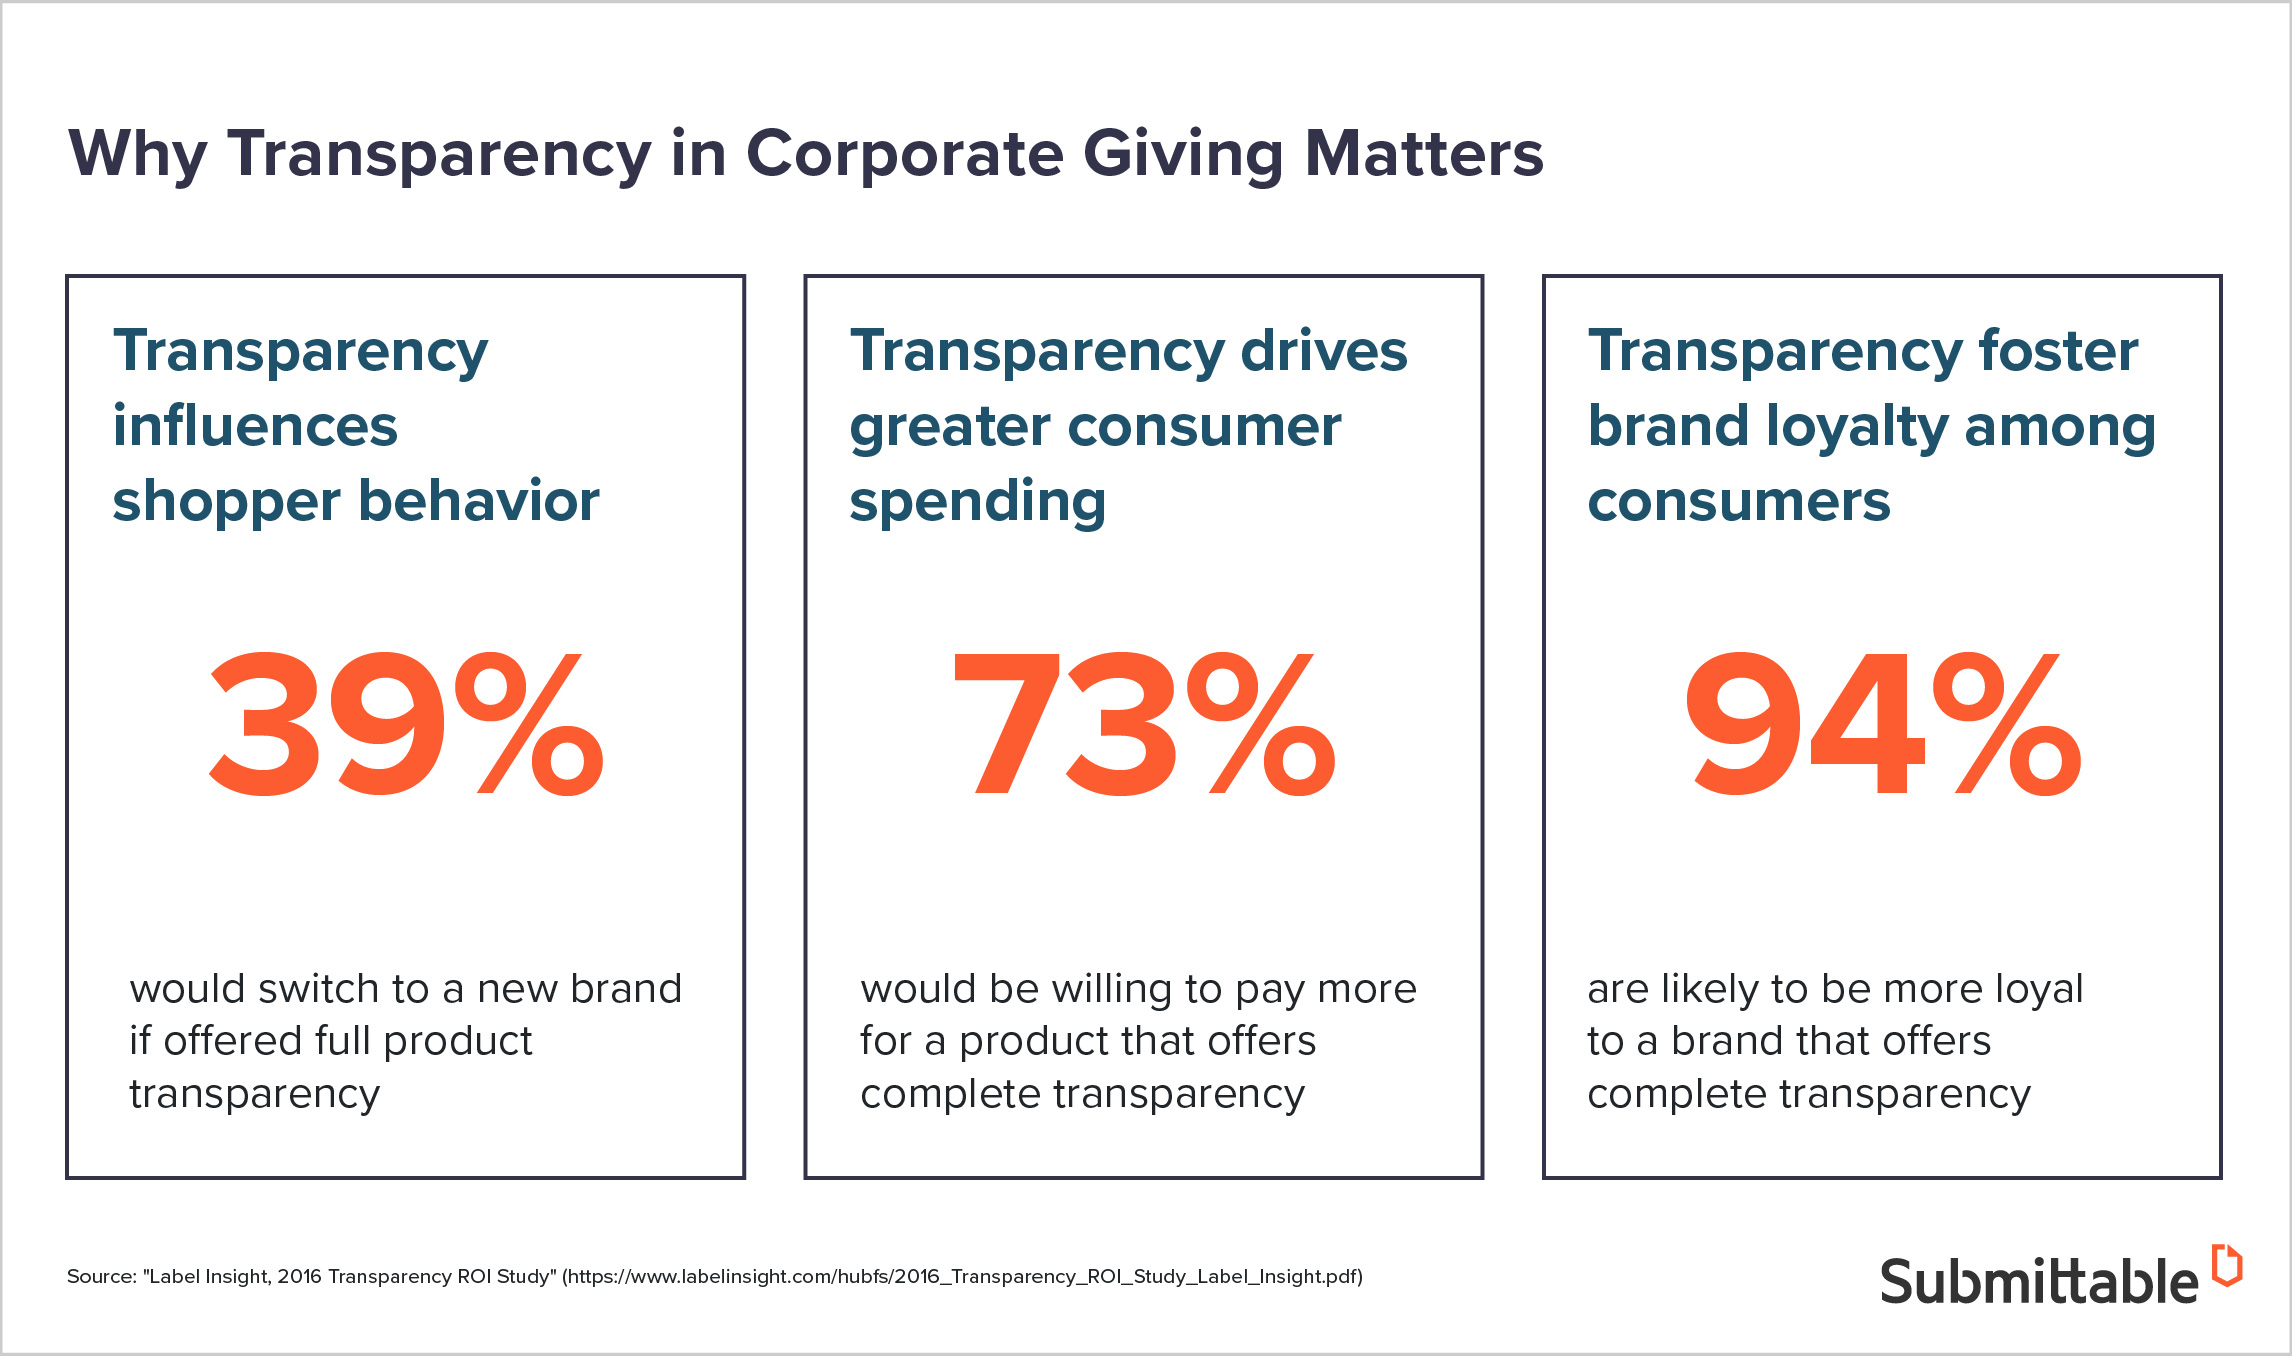 Why transparency in corporate giving matters